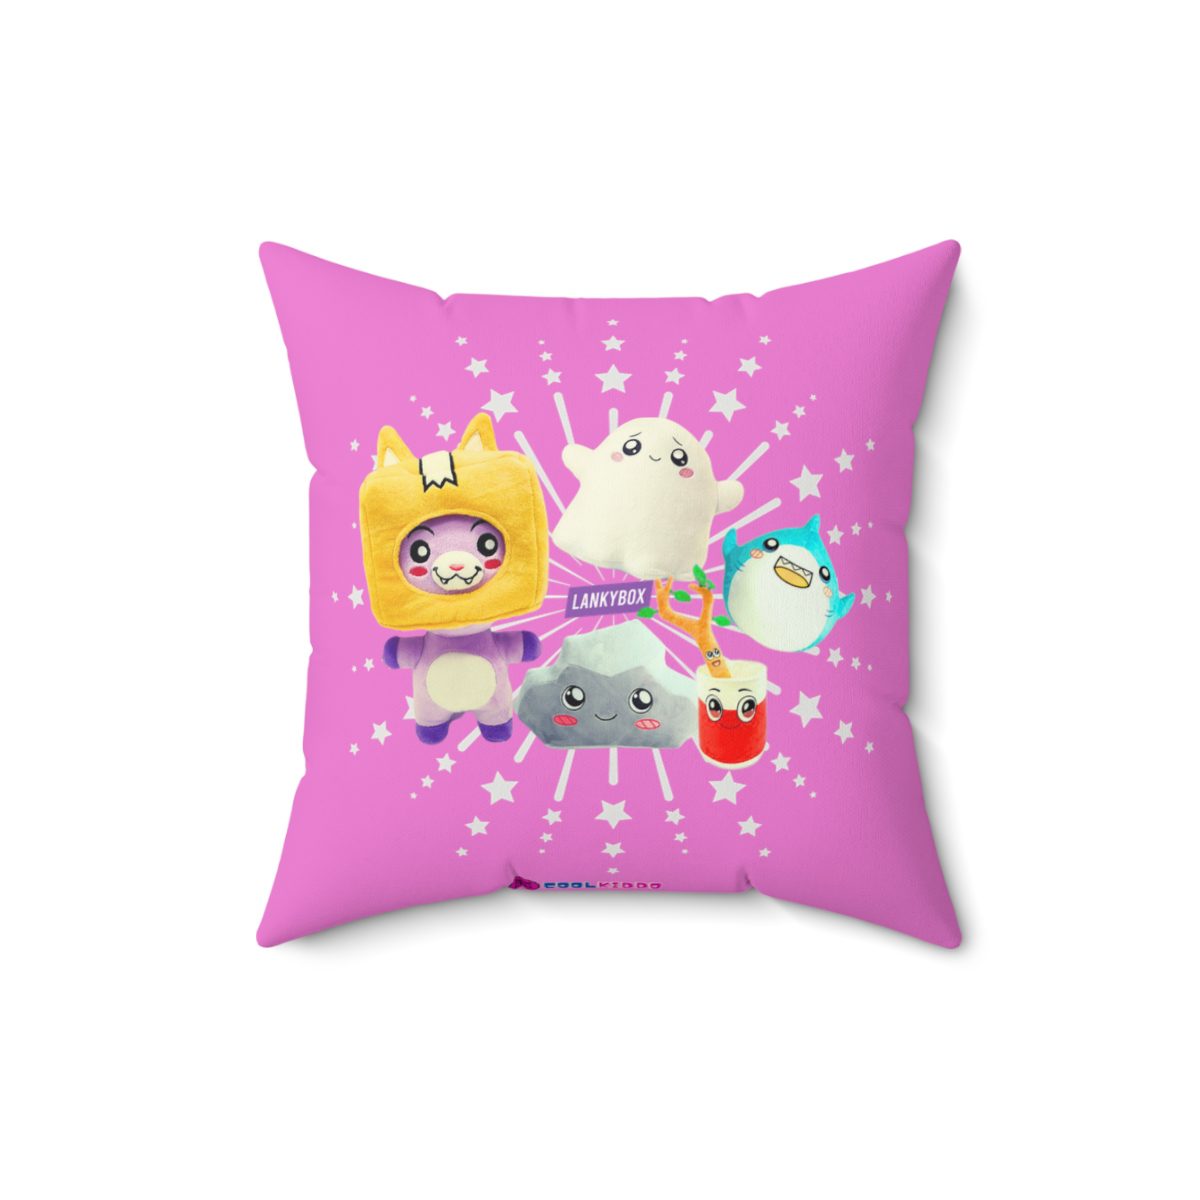 Lankybox Cute Characters Pink Cushion: Double-Sided Print Cool Kiddo 10